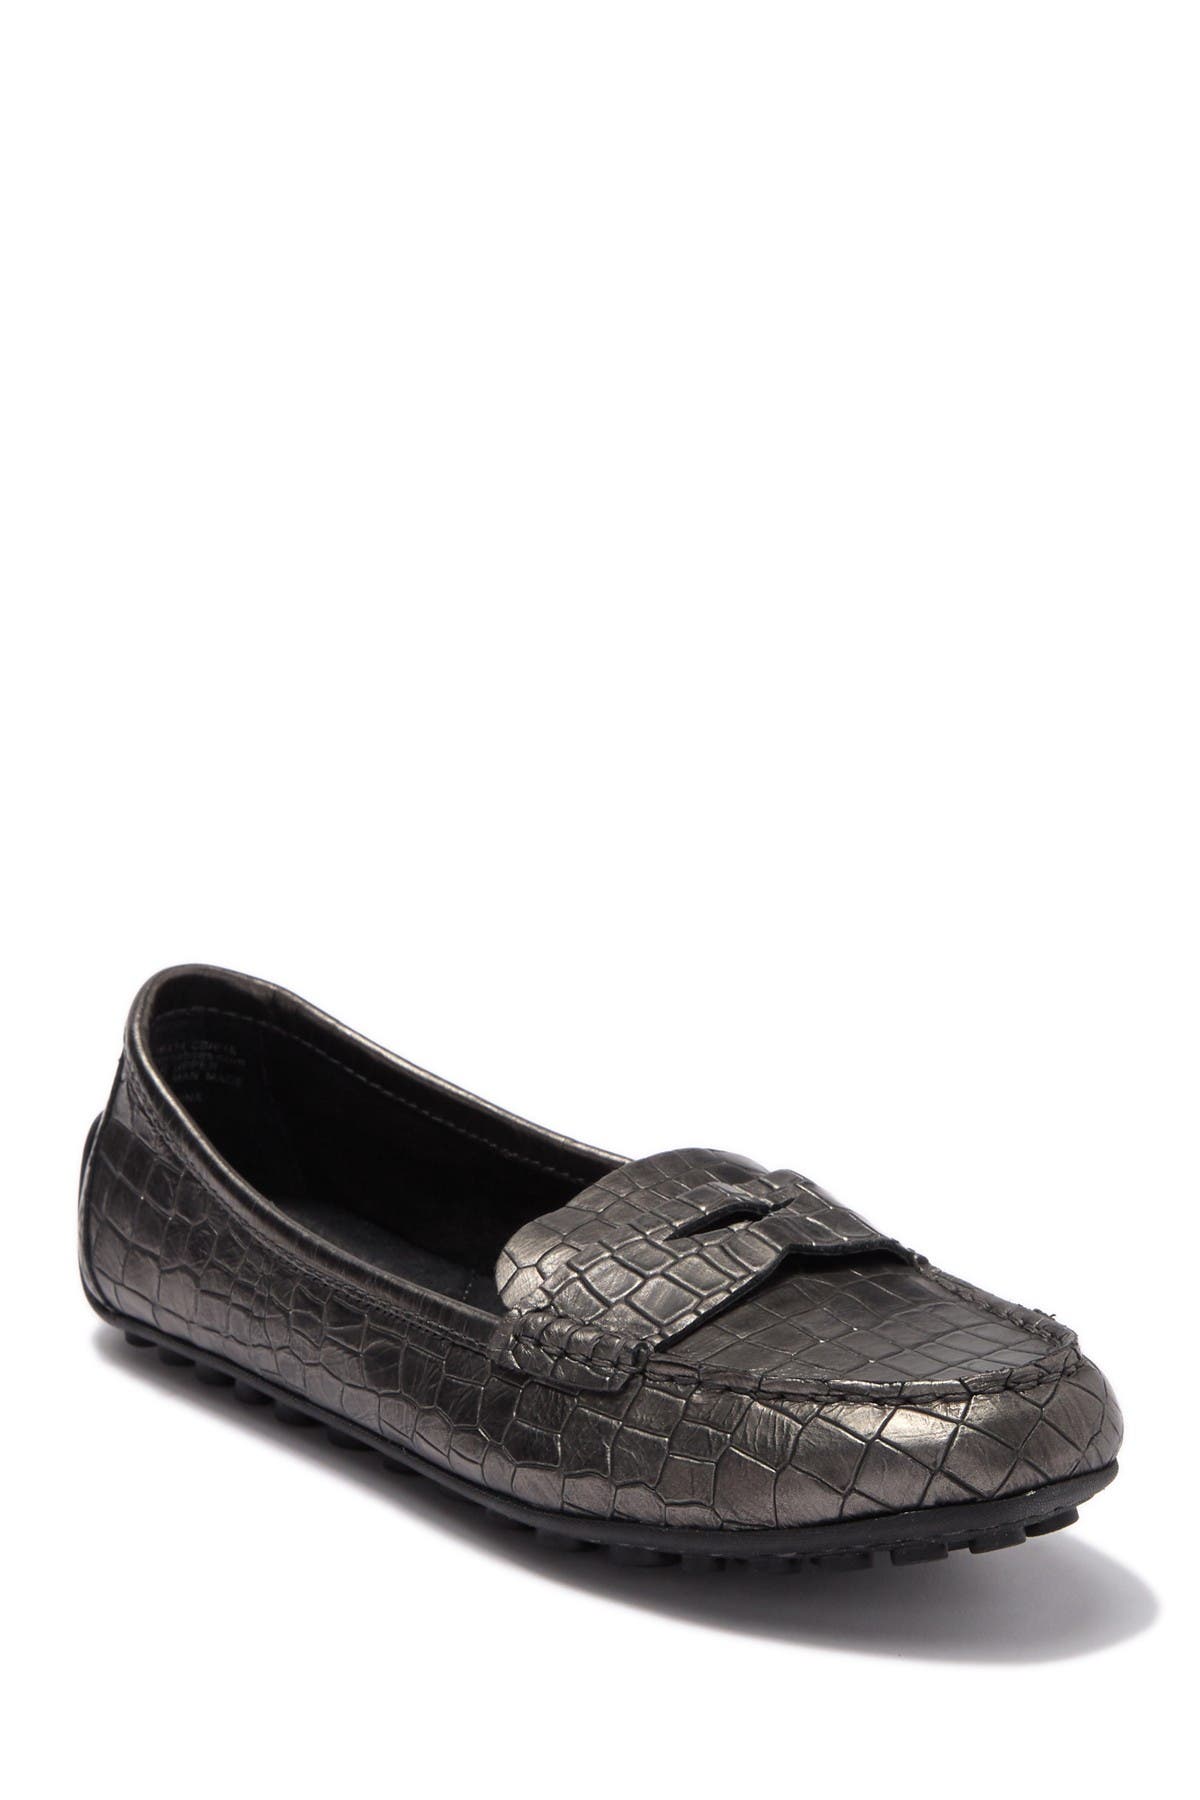 penny loafers nordstrom